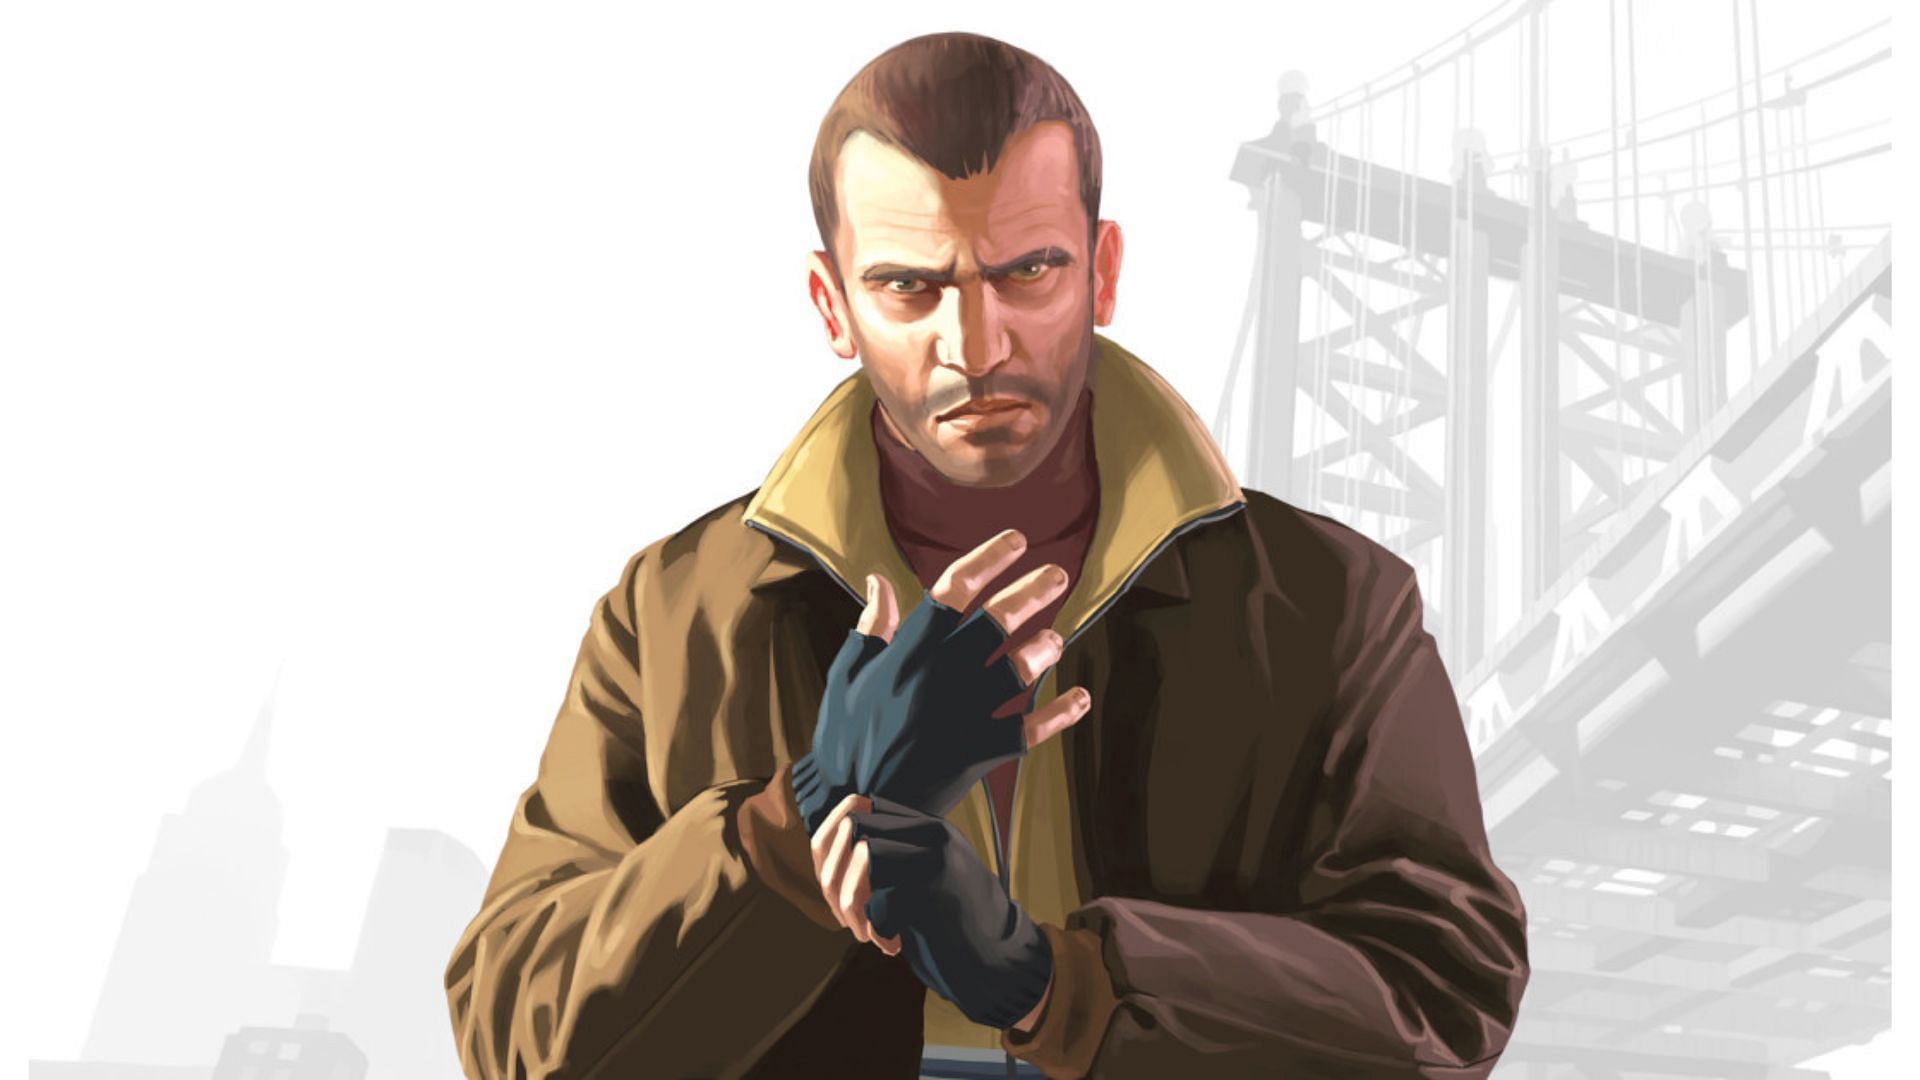 GTA 4 receives a new update on PC, and it fixes a major issue